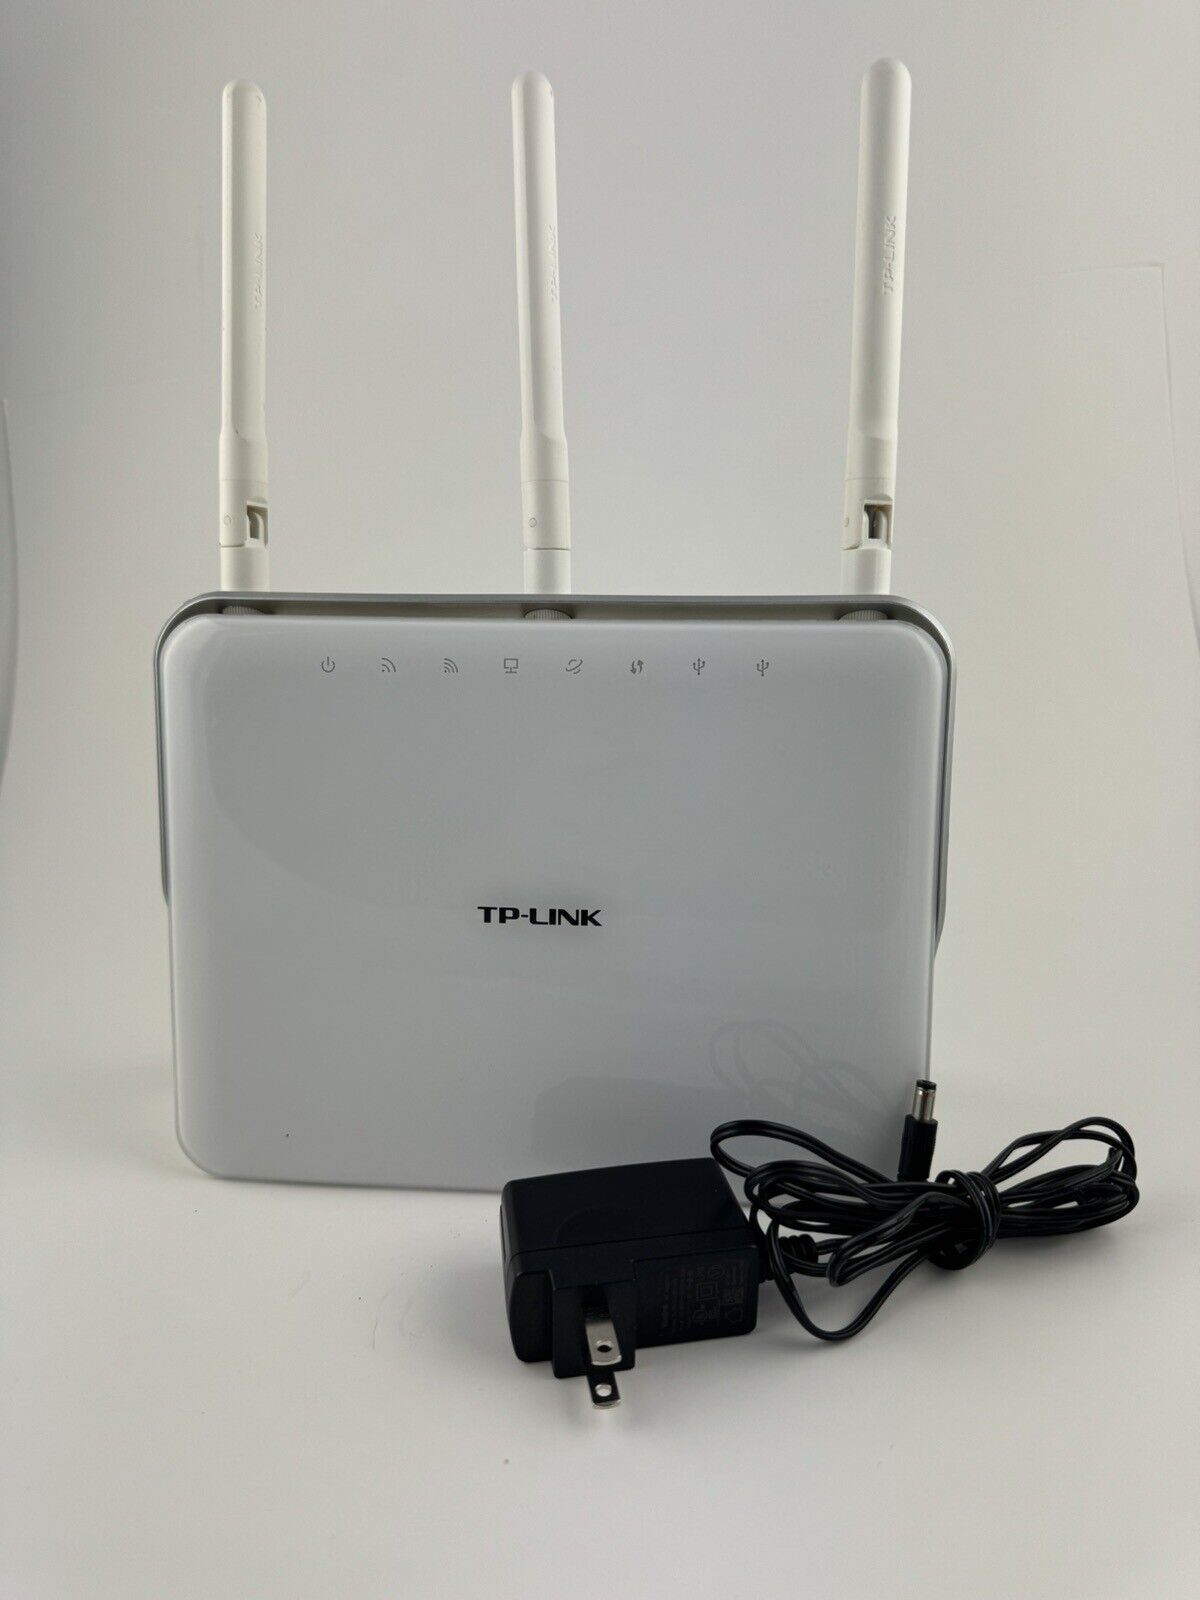 TP-Link Archer C9 AC1900 Smart WiFi Router Dual-Band WORKS TESTED